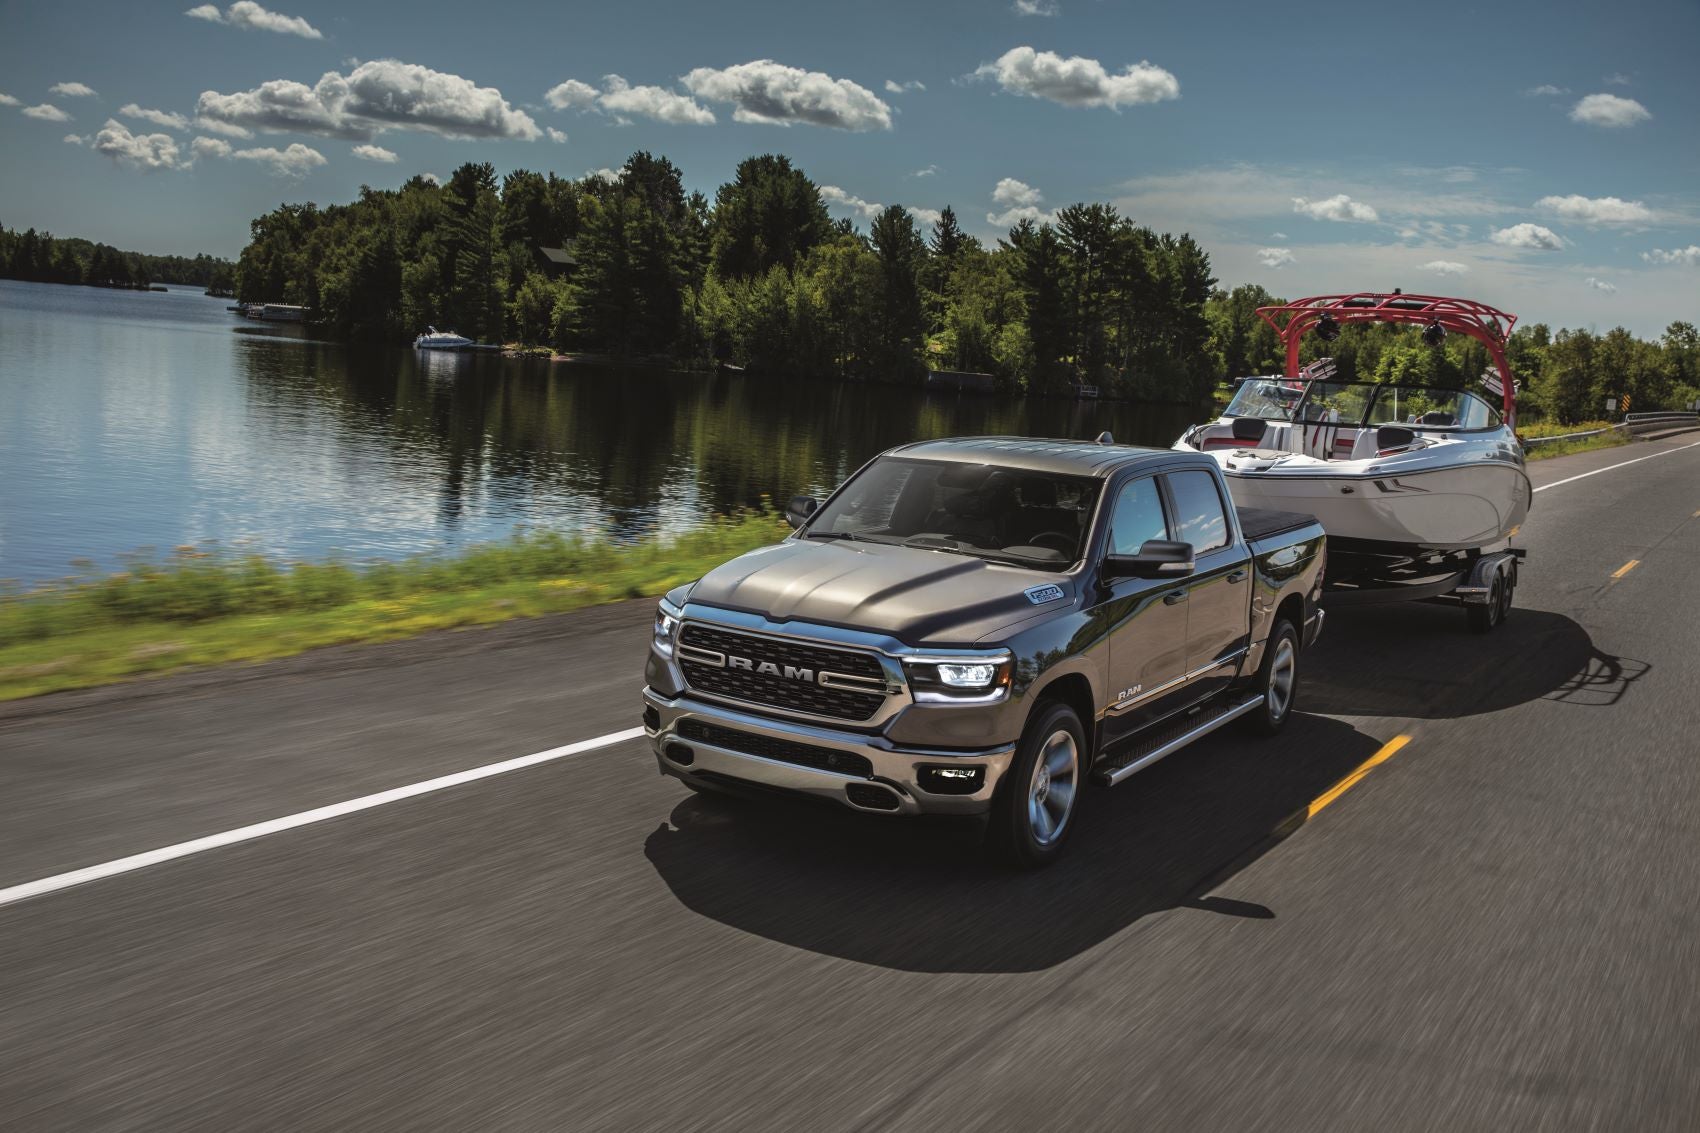 2022 Ram 1500 Towing a Boat by the Lake